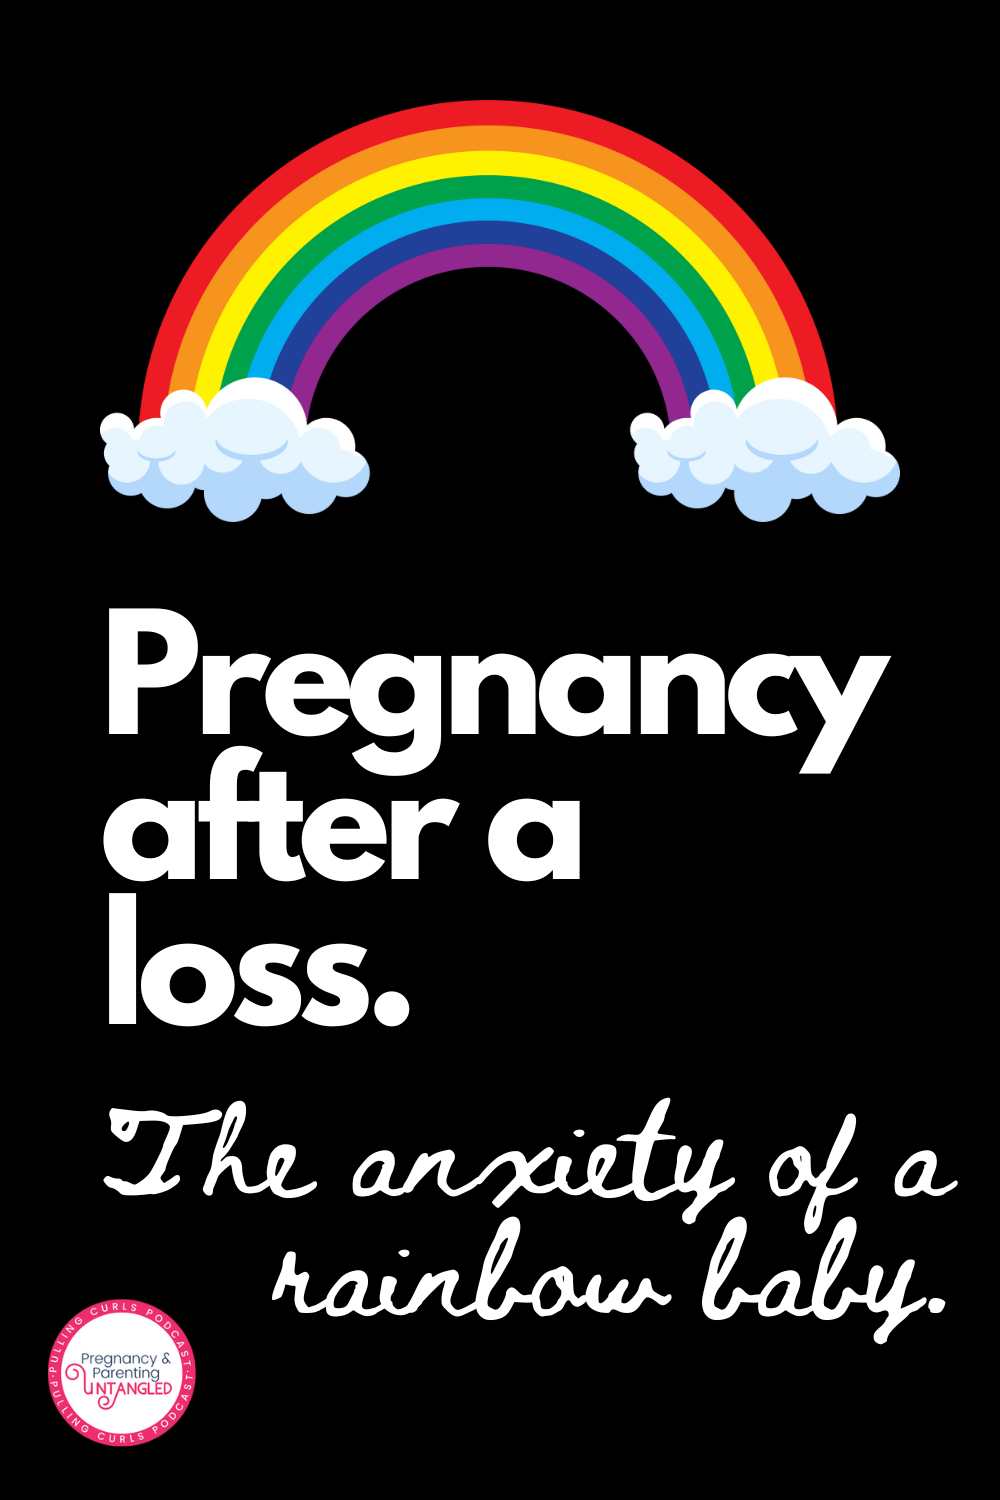 Embracing pregnancy after loss can bring mixed emotions. Discover gentle ways to manage anxiety and find solace during this delicate journey. From seeking support to practicing self-care, empower yourself with strategies to nurture your mental and emotional well-being. You're not alone in this journey. #MomToBe" Pregnancy after loss Anxiety management Self-care Mom-to-be Pregnancy anxiety Pregnancy loss support Coping strategies Emotional well-being Maternity insights Healing journey via @pullingcurls